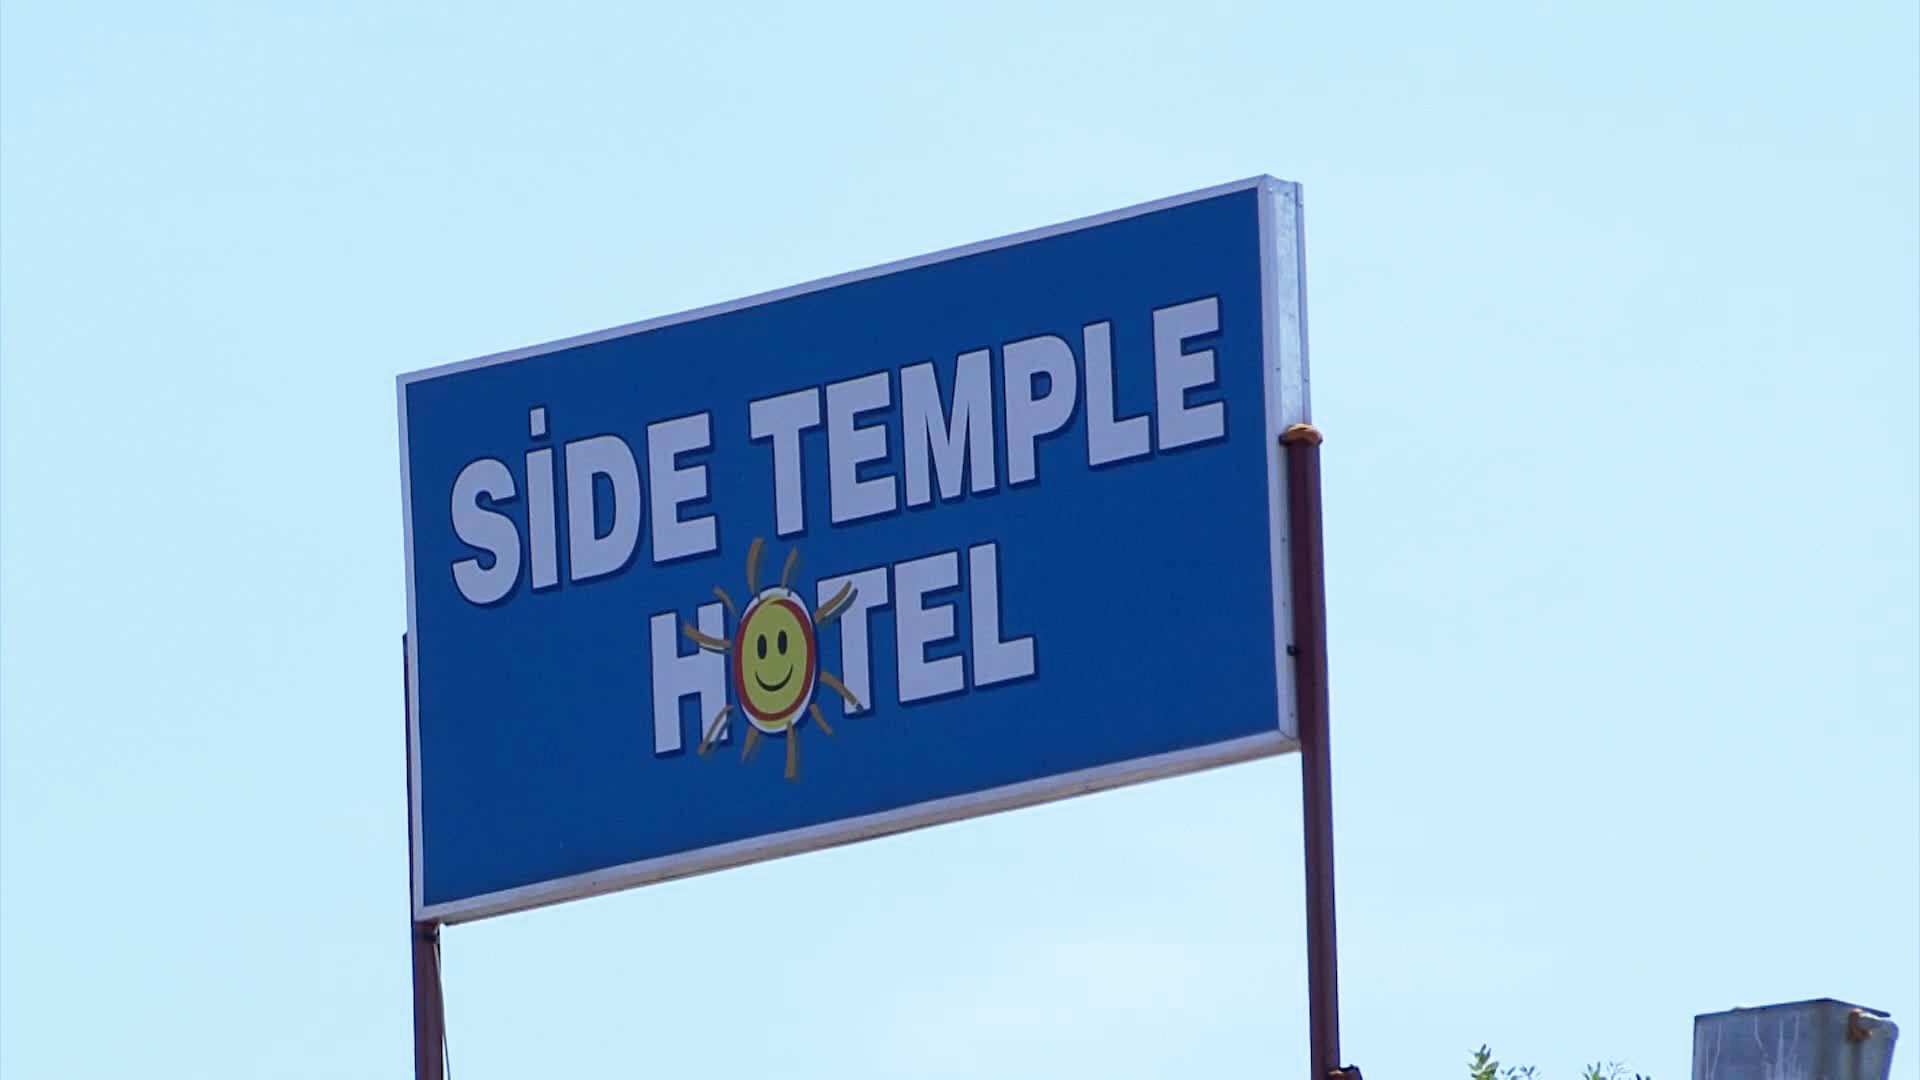 Side Temple Hotel